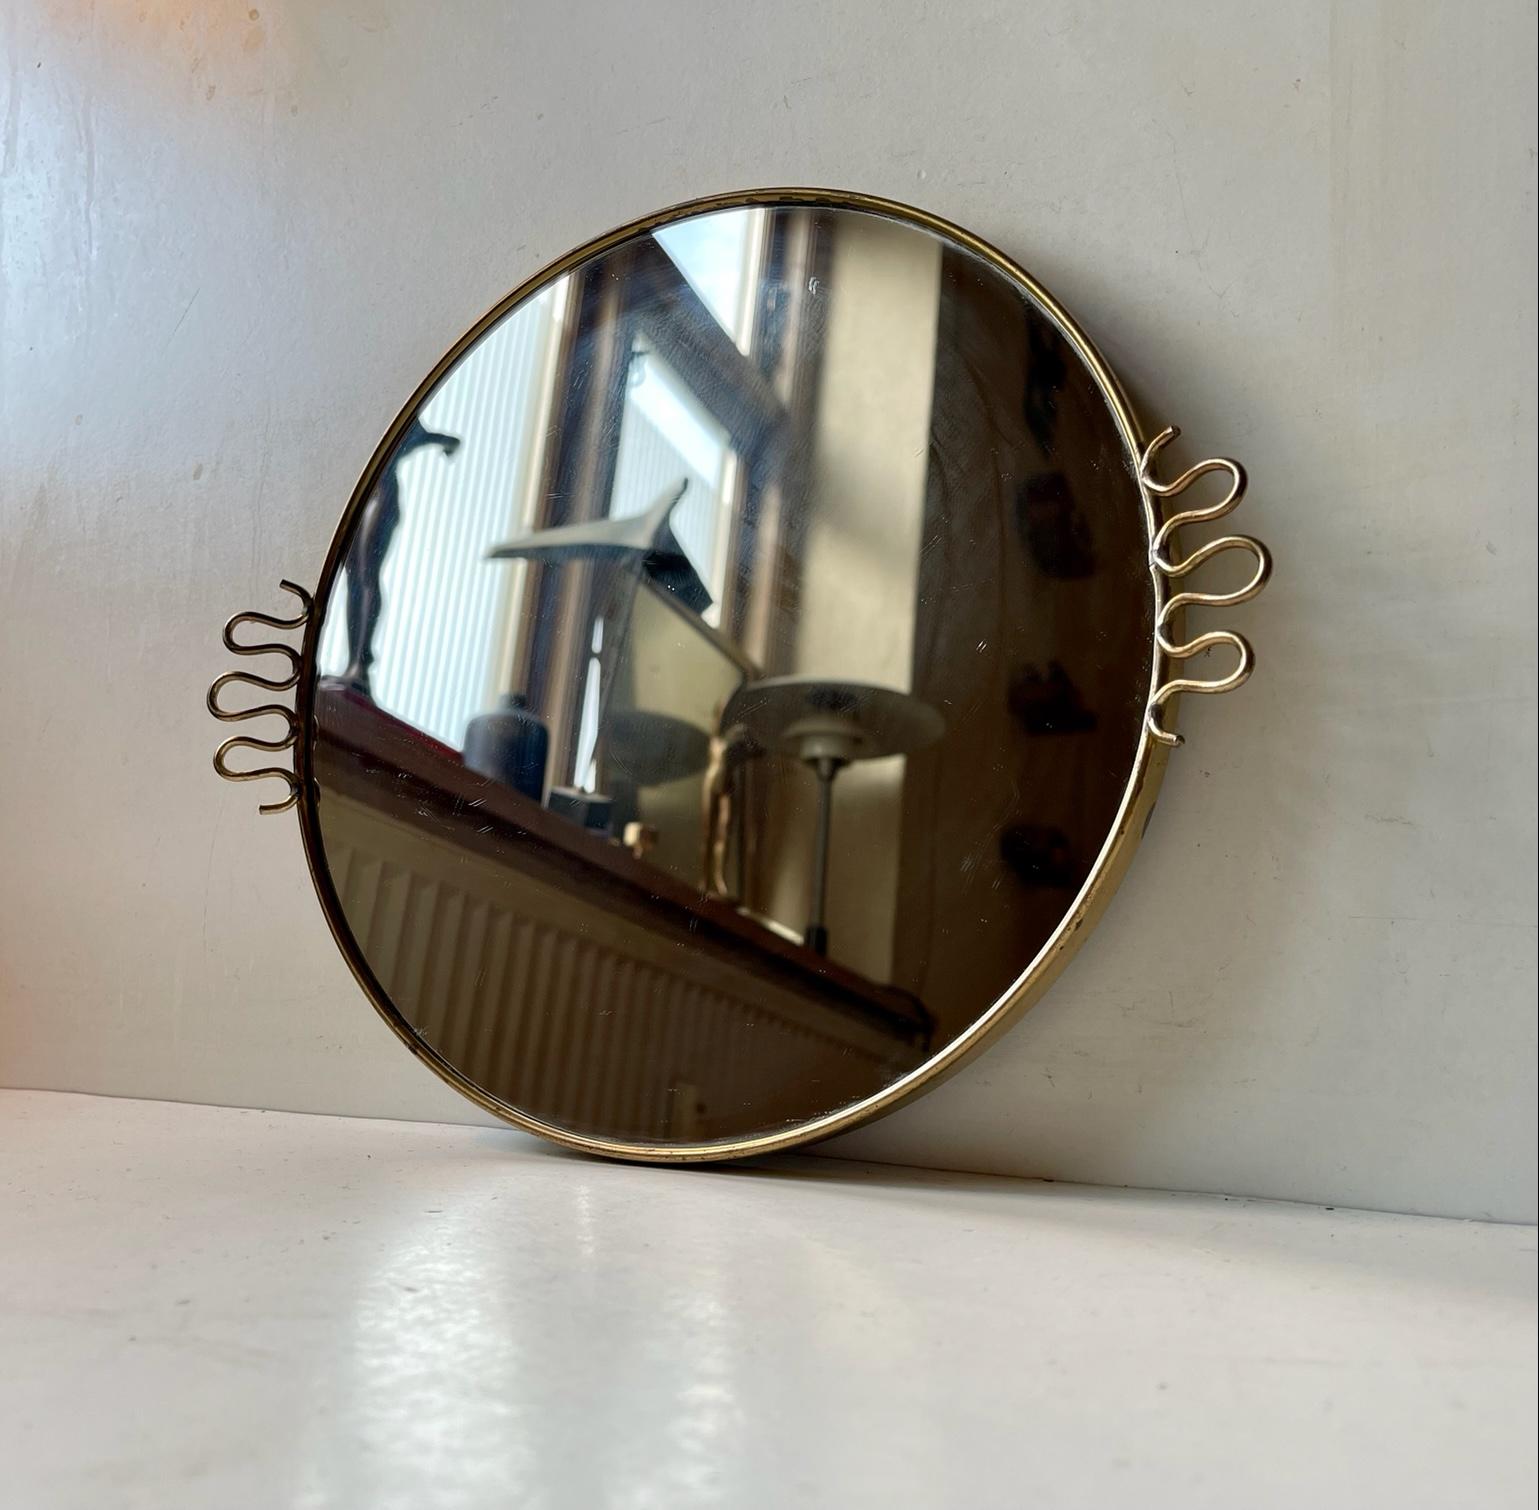 A small wall hung brass mirror. Suitable as vanity/make-up mirror. It features stylish brass loops reminiscent of those seen on Josef Franks Mirrors for Svensk Tenn. Measurements: D: 26 cm, Dept: 2.5 cm. The mirror glass and back-plate has been